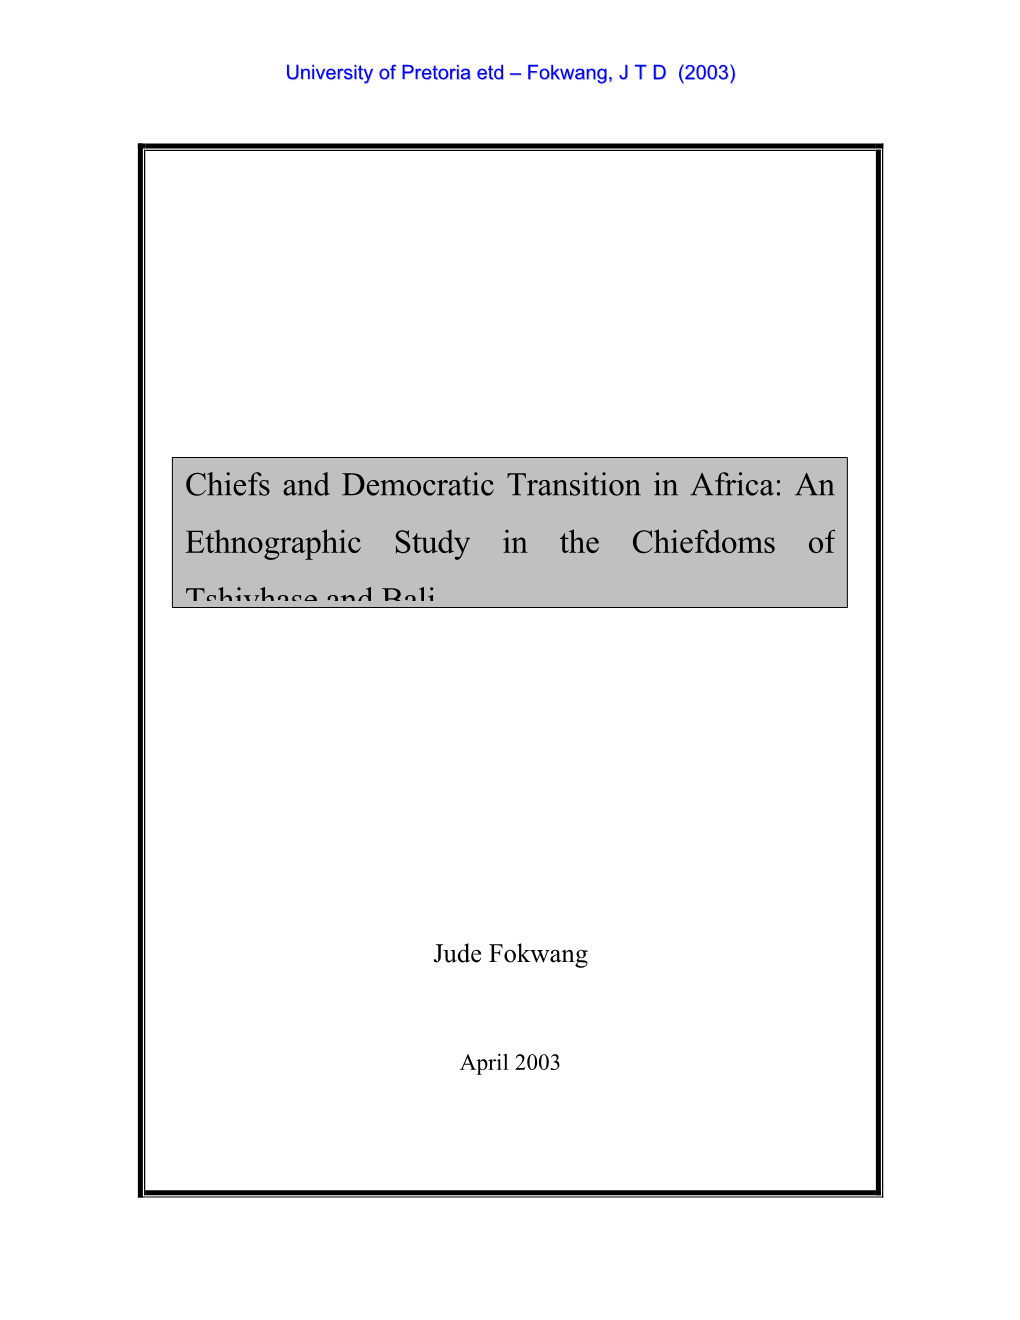 An Ethnographic Study in the Chiefdoms of Tshivhase and Bali